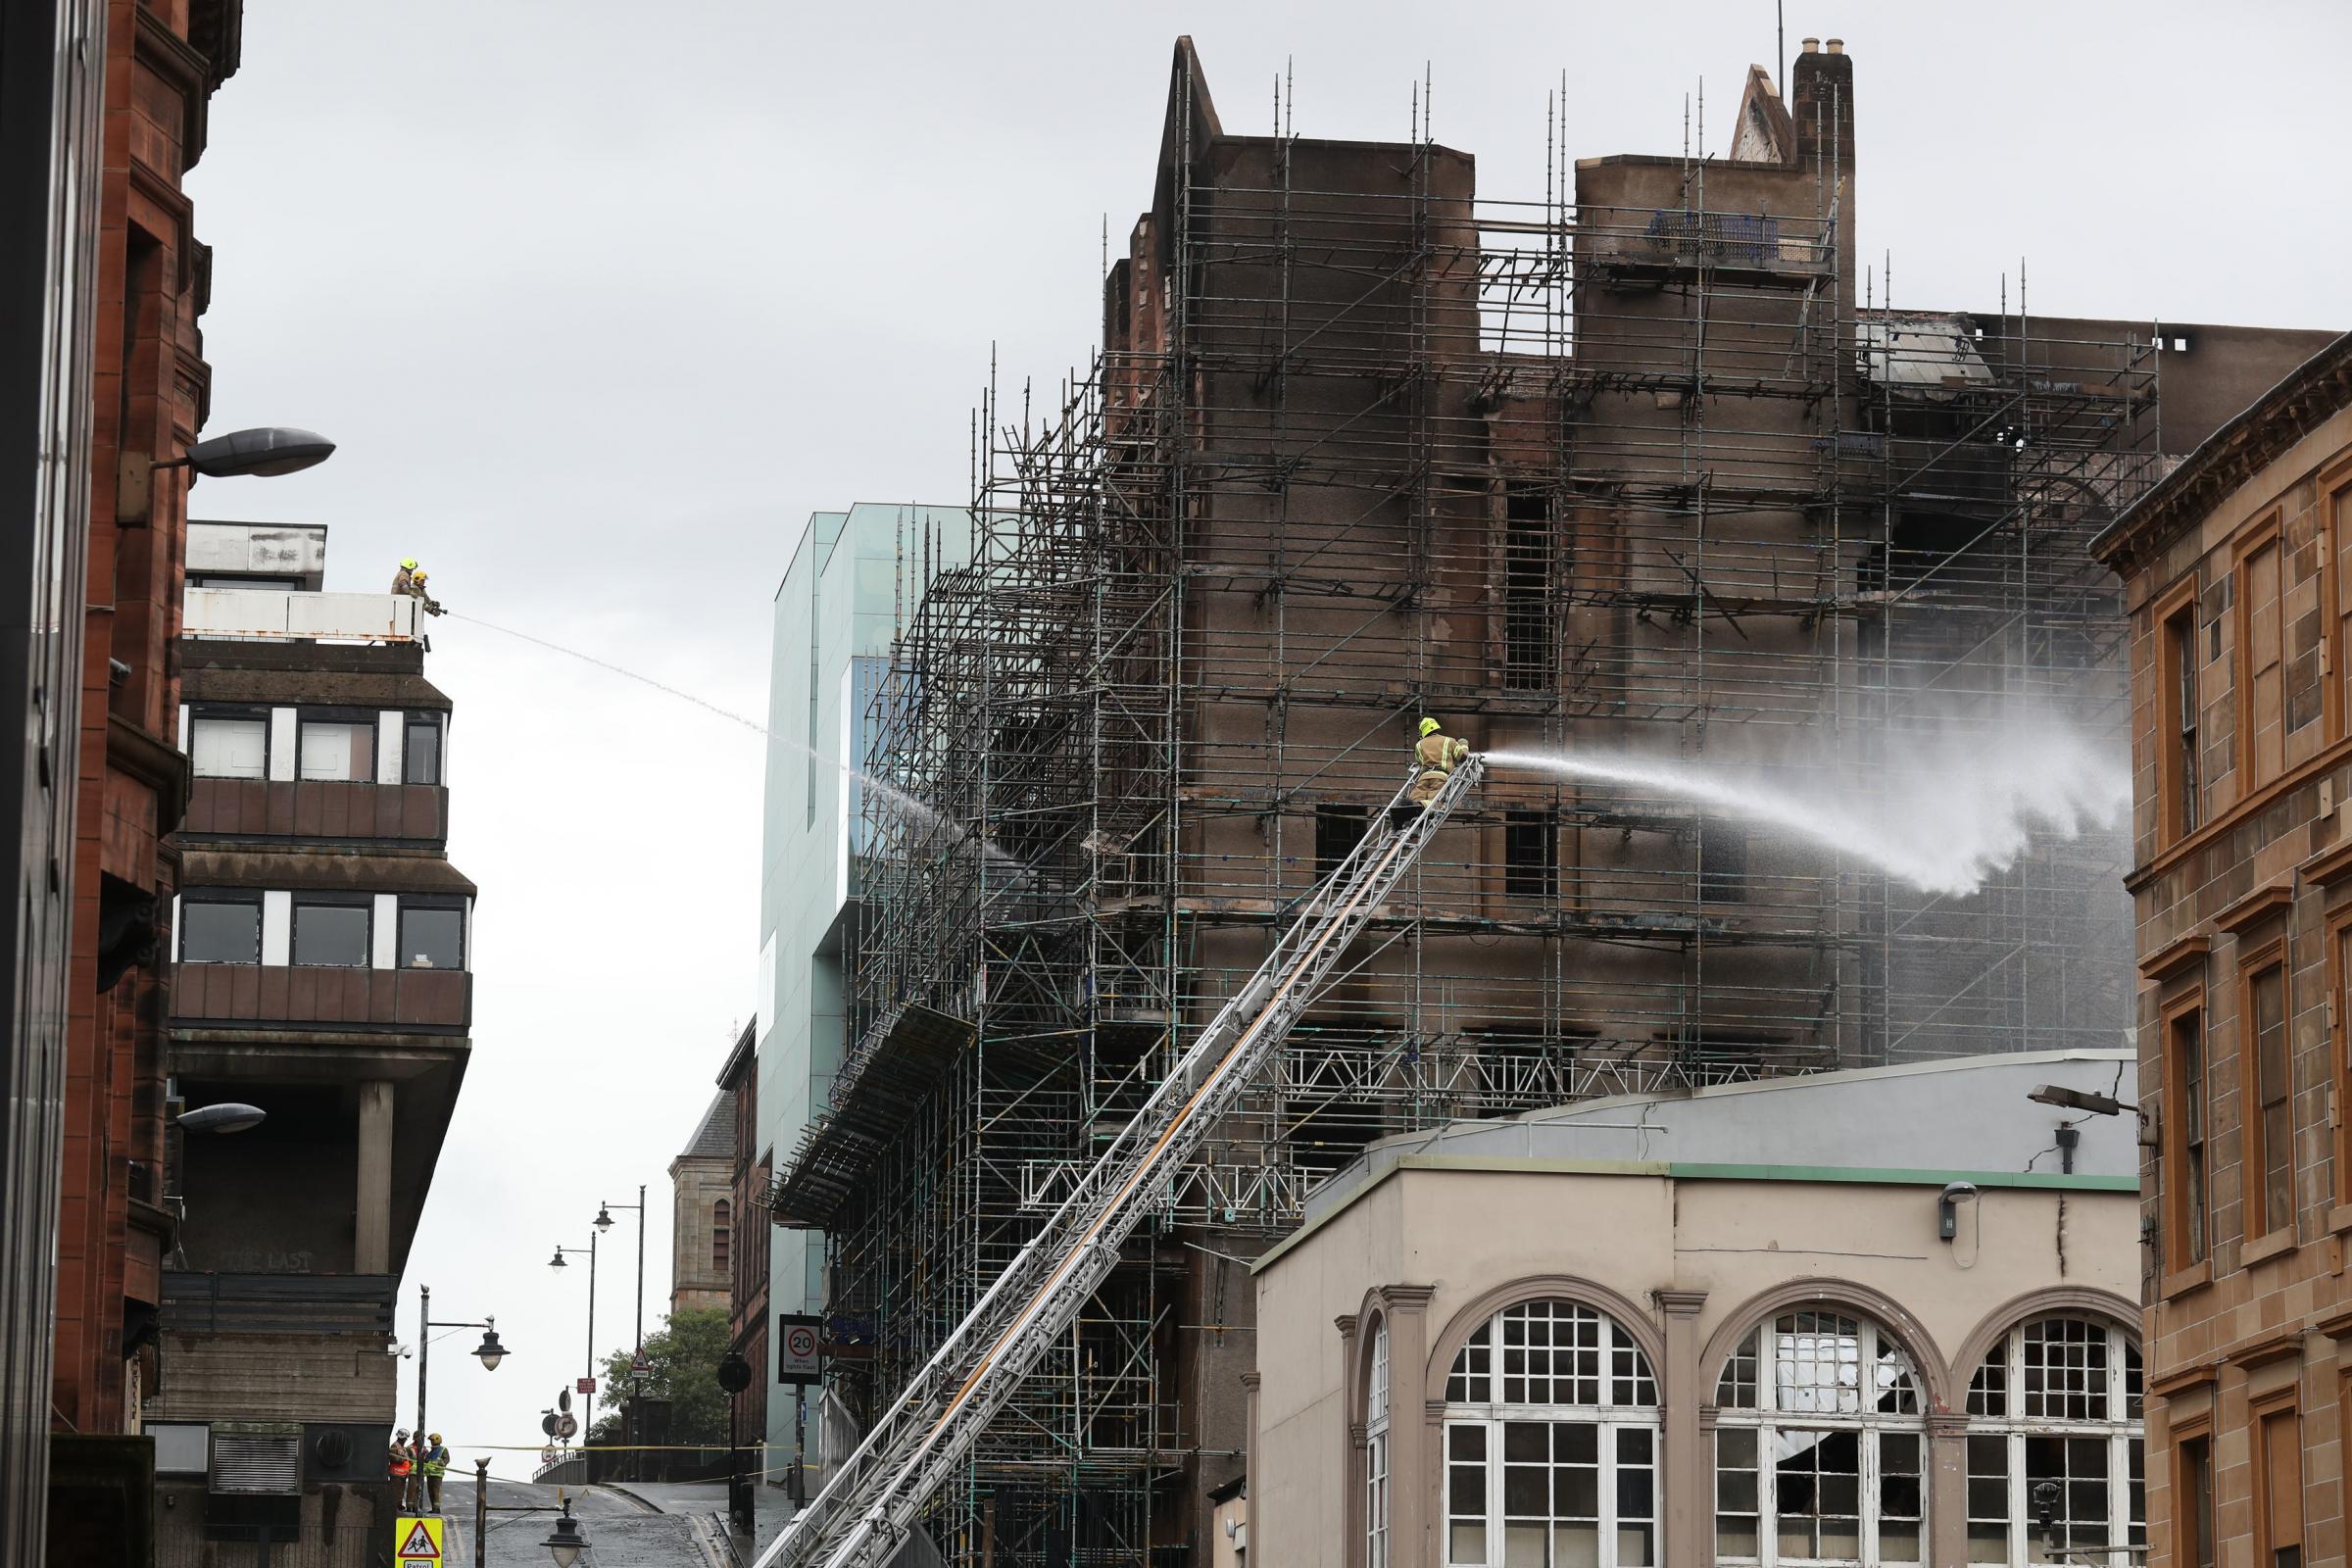 Firefighters dampening down following the fire at the Glasgow School of Art in 2018